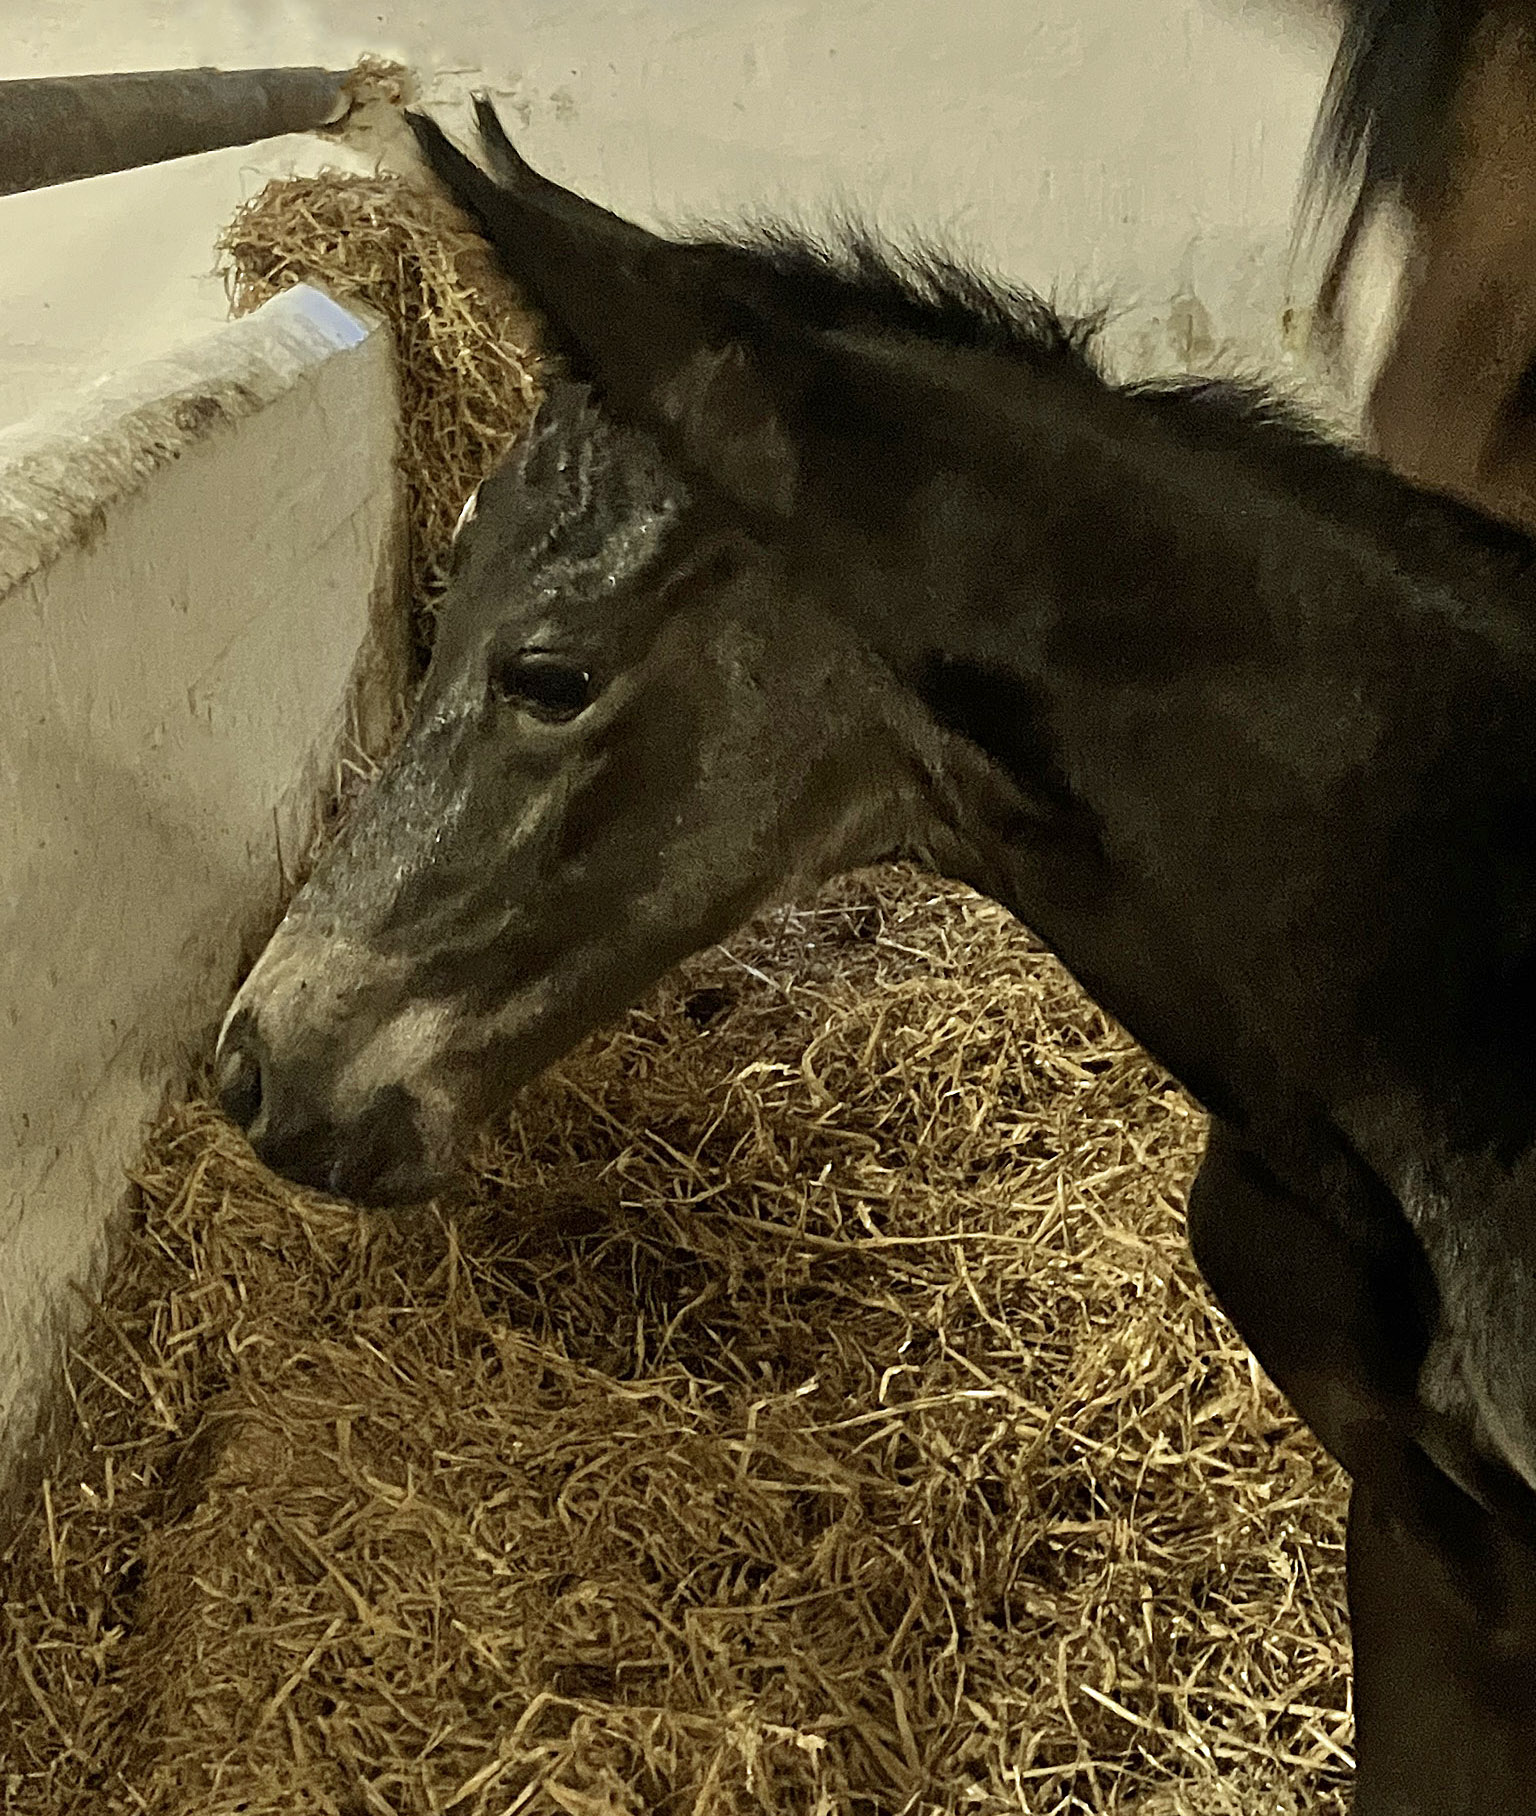 Filly by Saint Cyr out of Pr.St. Schwalbenland by Touch my Heart - Foto: Beate Langels